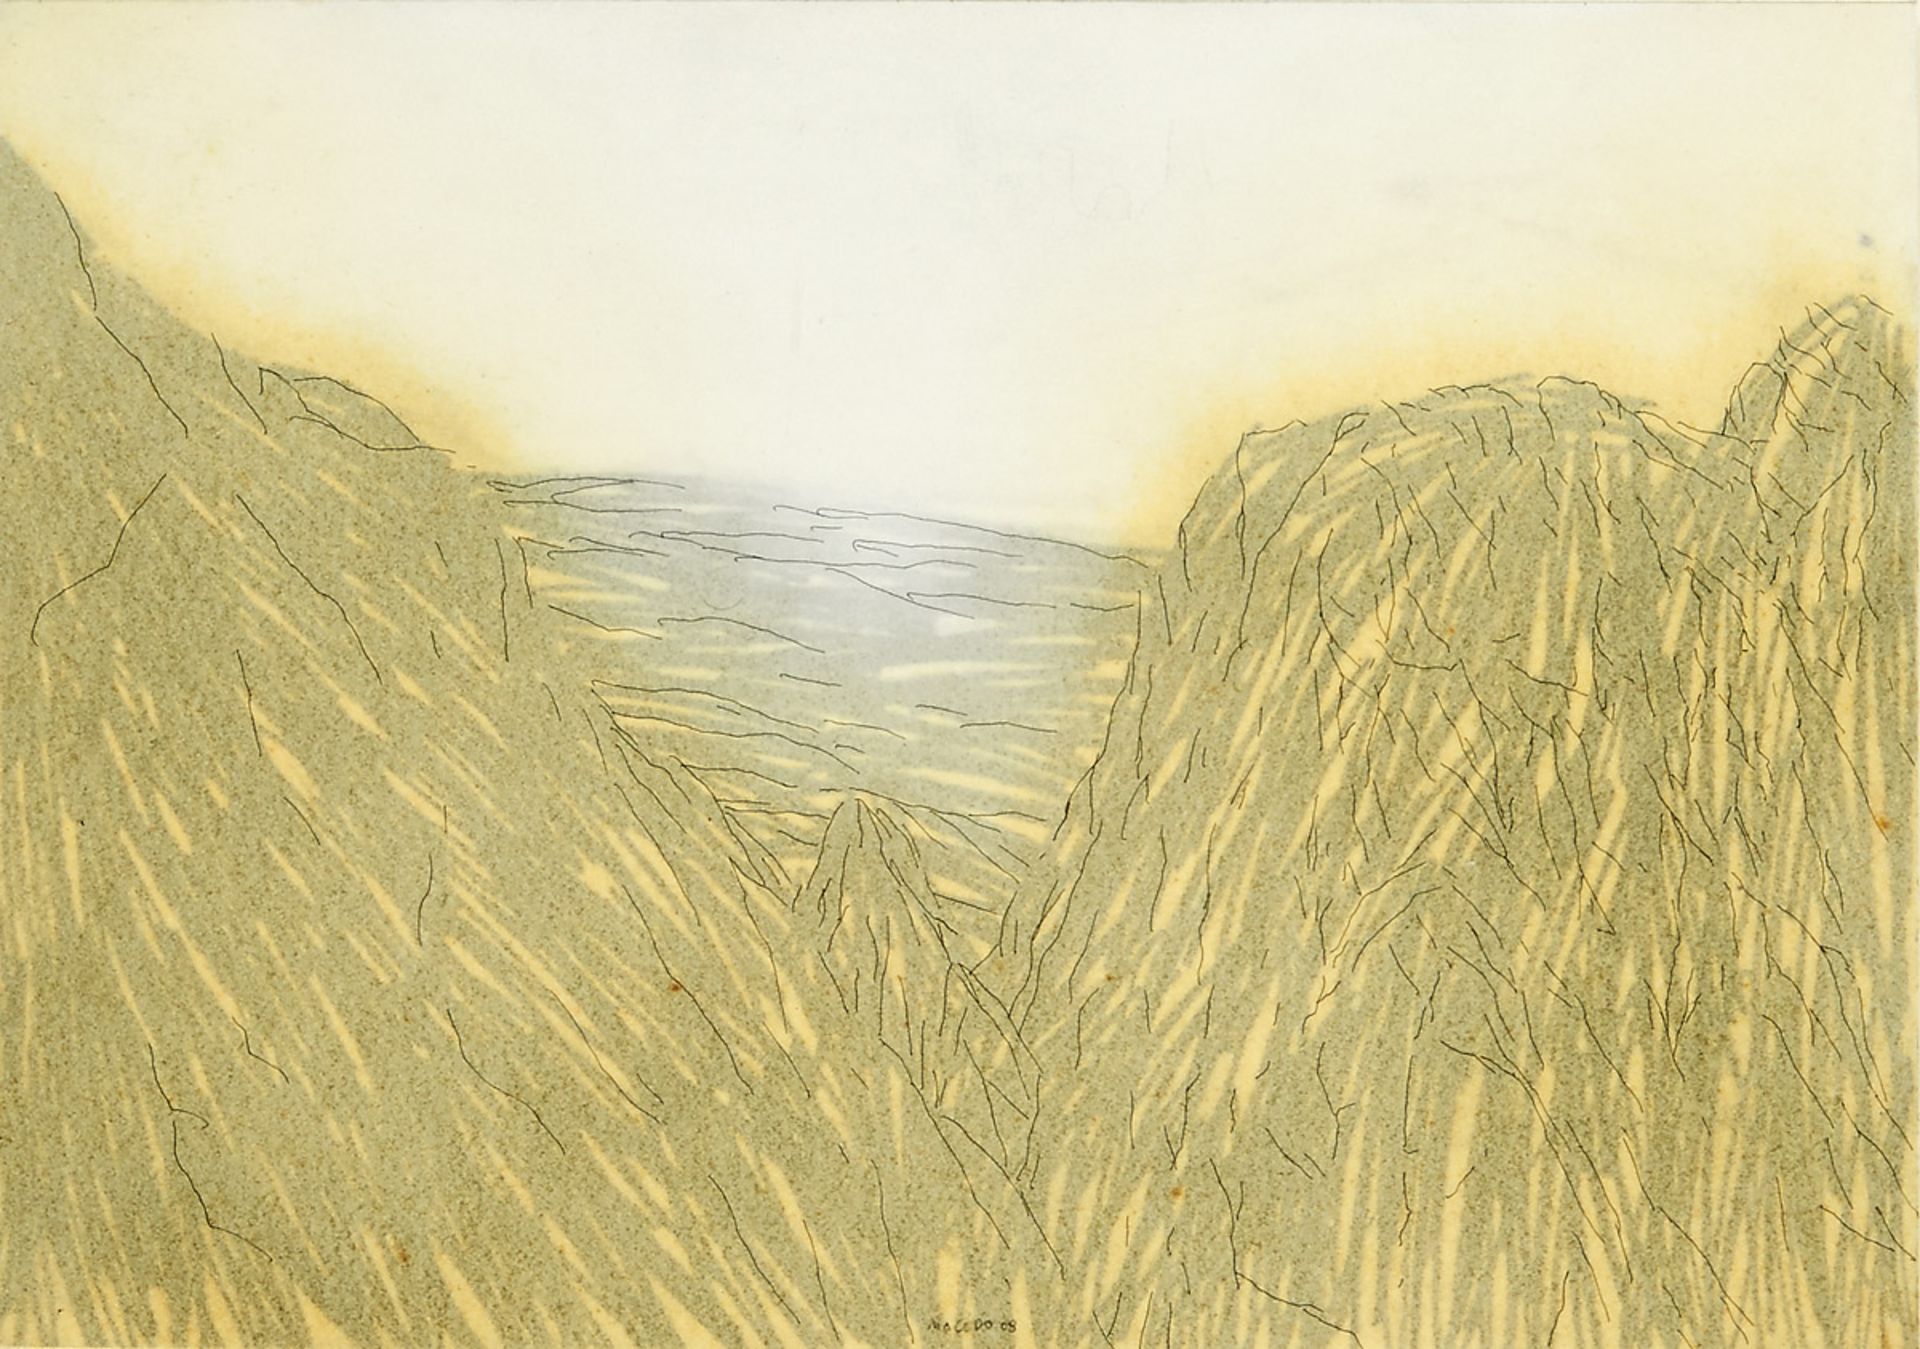 RUI MACEDO - NASC. 1975, Untitled, mixed technique on paper, signed and dated 2008, Dim. - 20 x 30